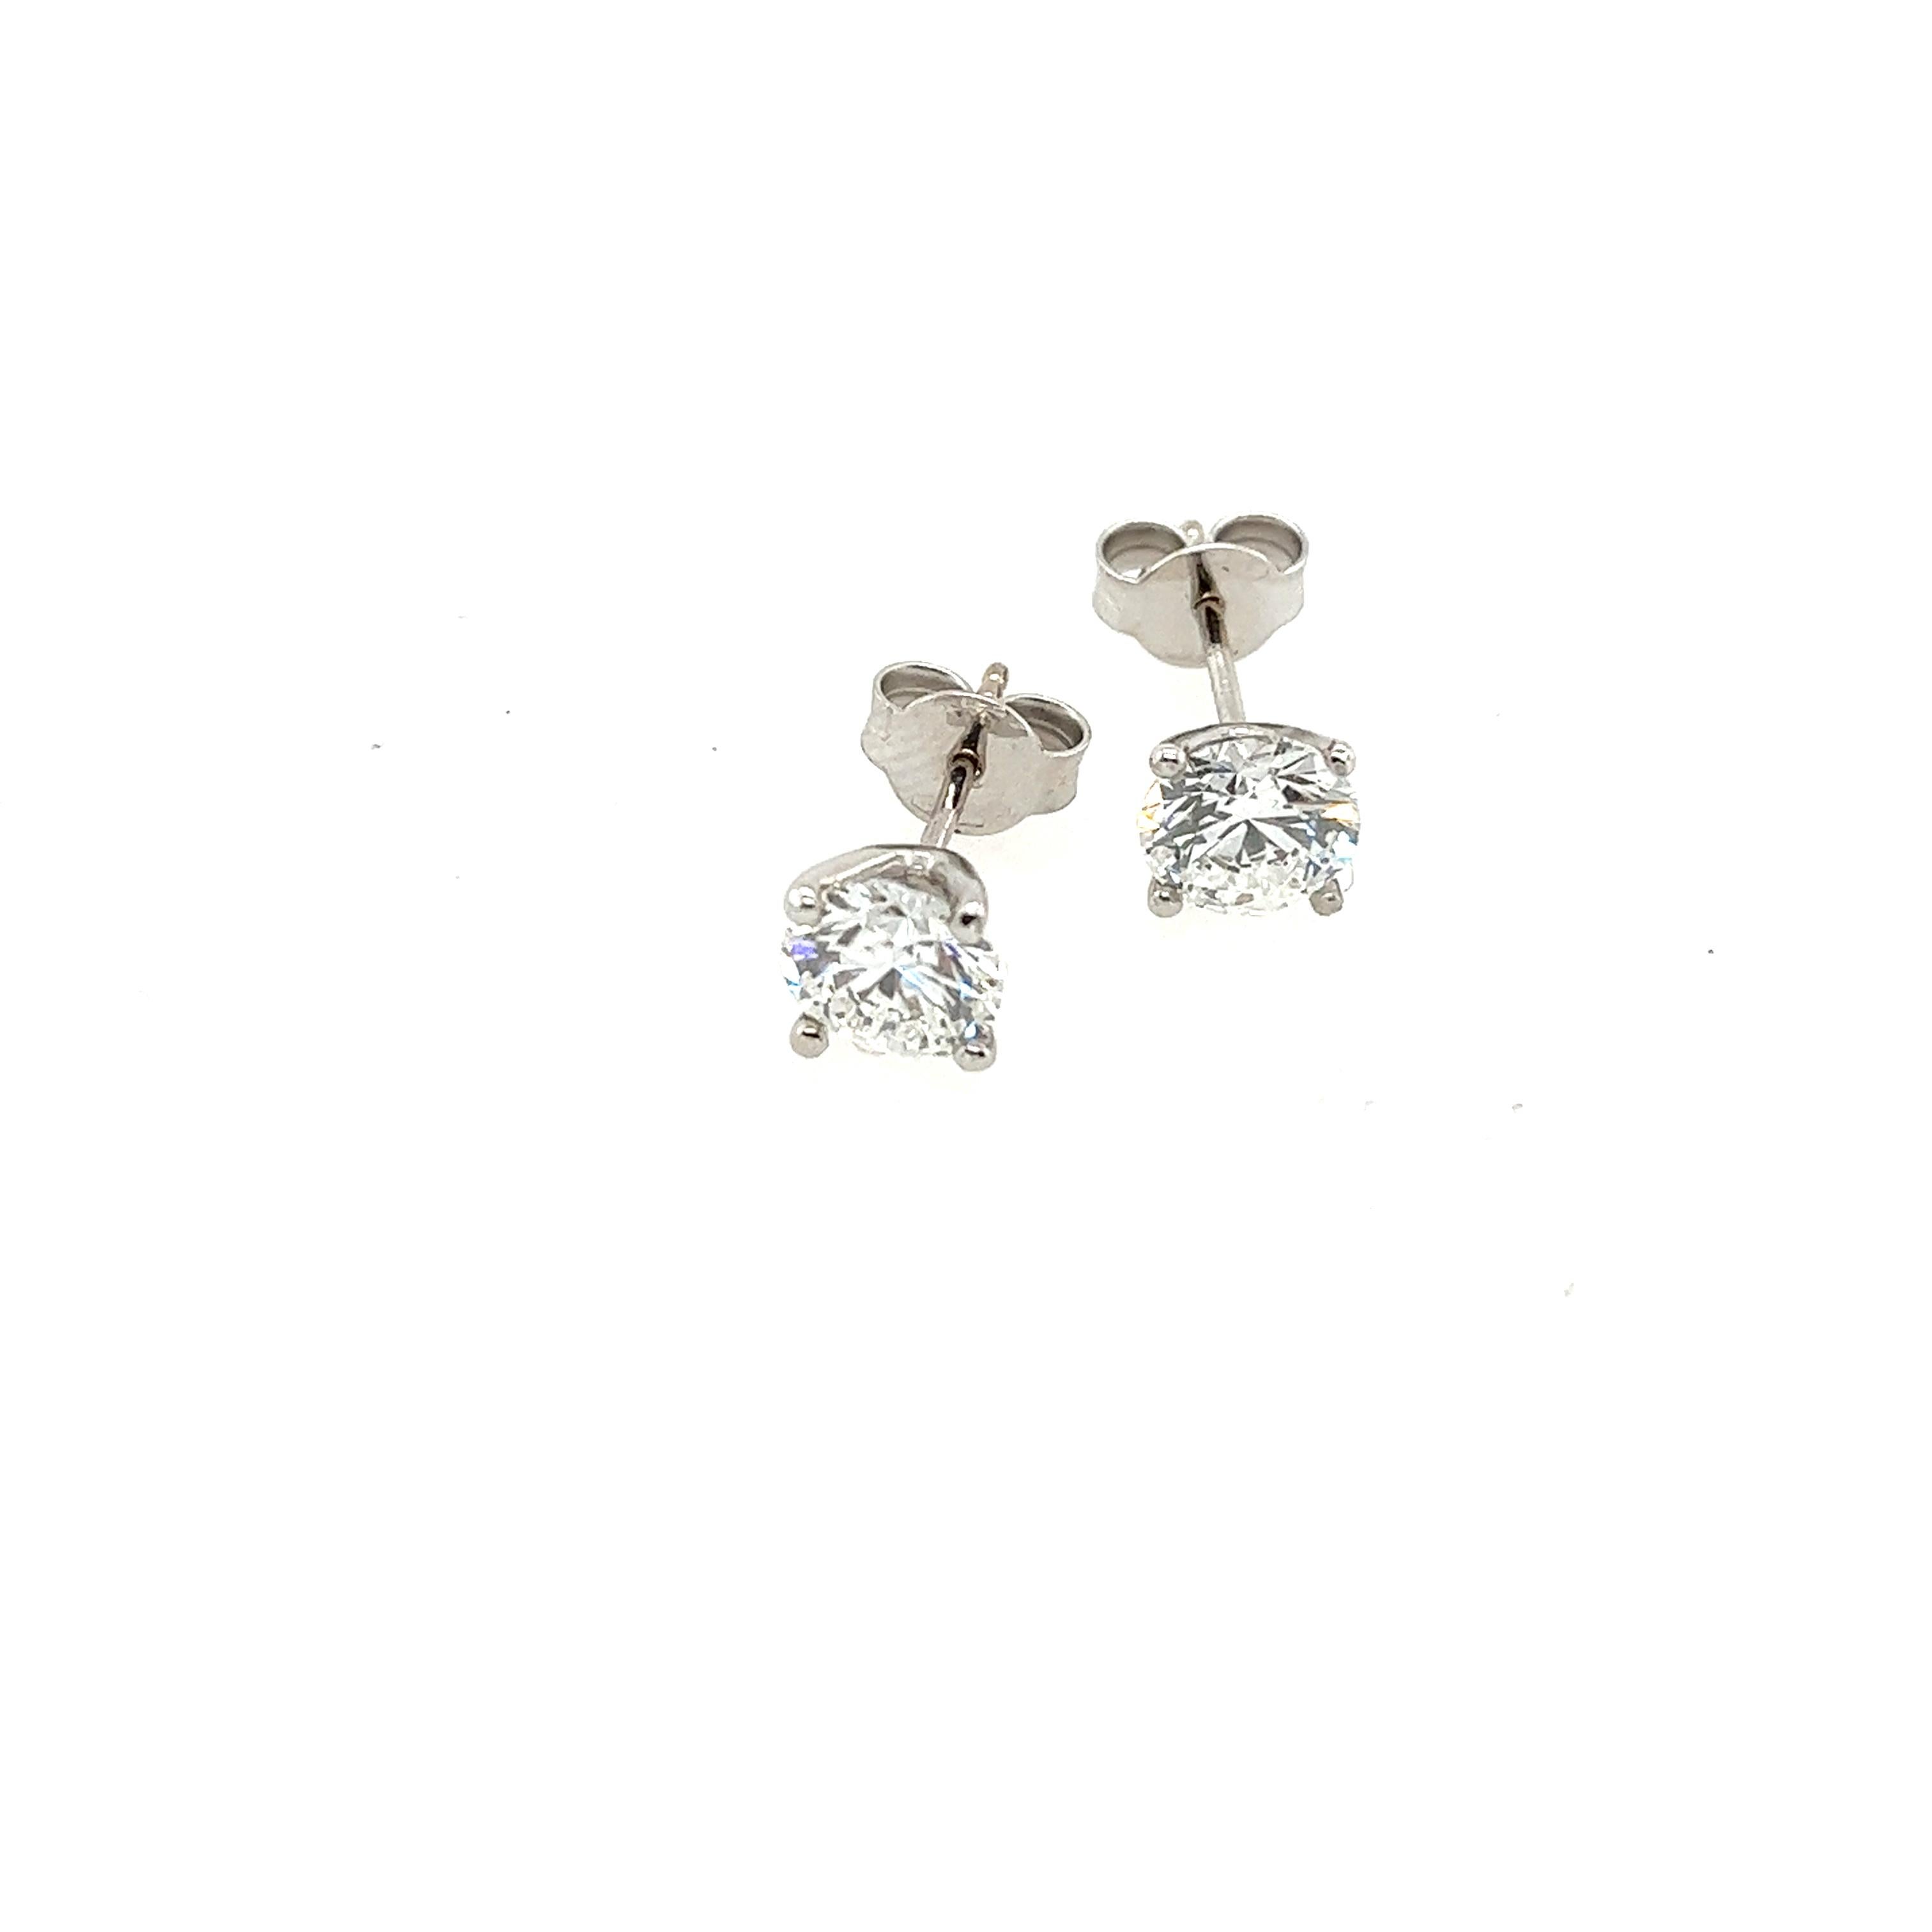 This pair of diamond stud earrings 
features a total of 2.04ct of round brilliant cut diamonds laboratory created, set in 18ct white gold. 
It's perfect for every day and can be worn with any outfit.
Total Diamond Weight: 2.04ct
Diamond Colour: